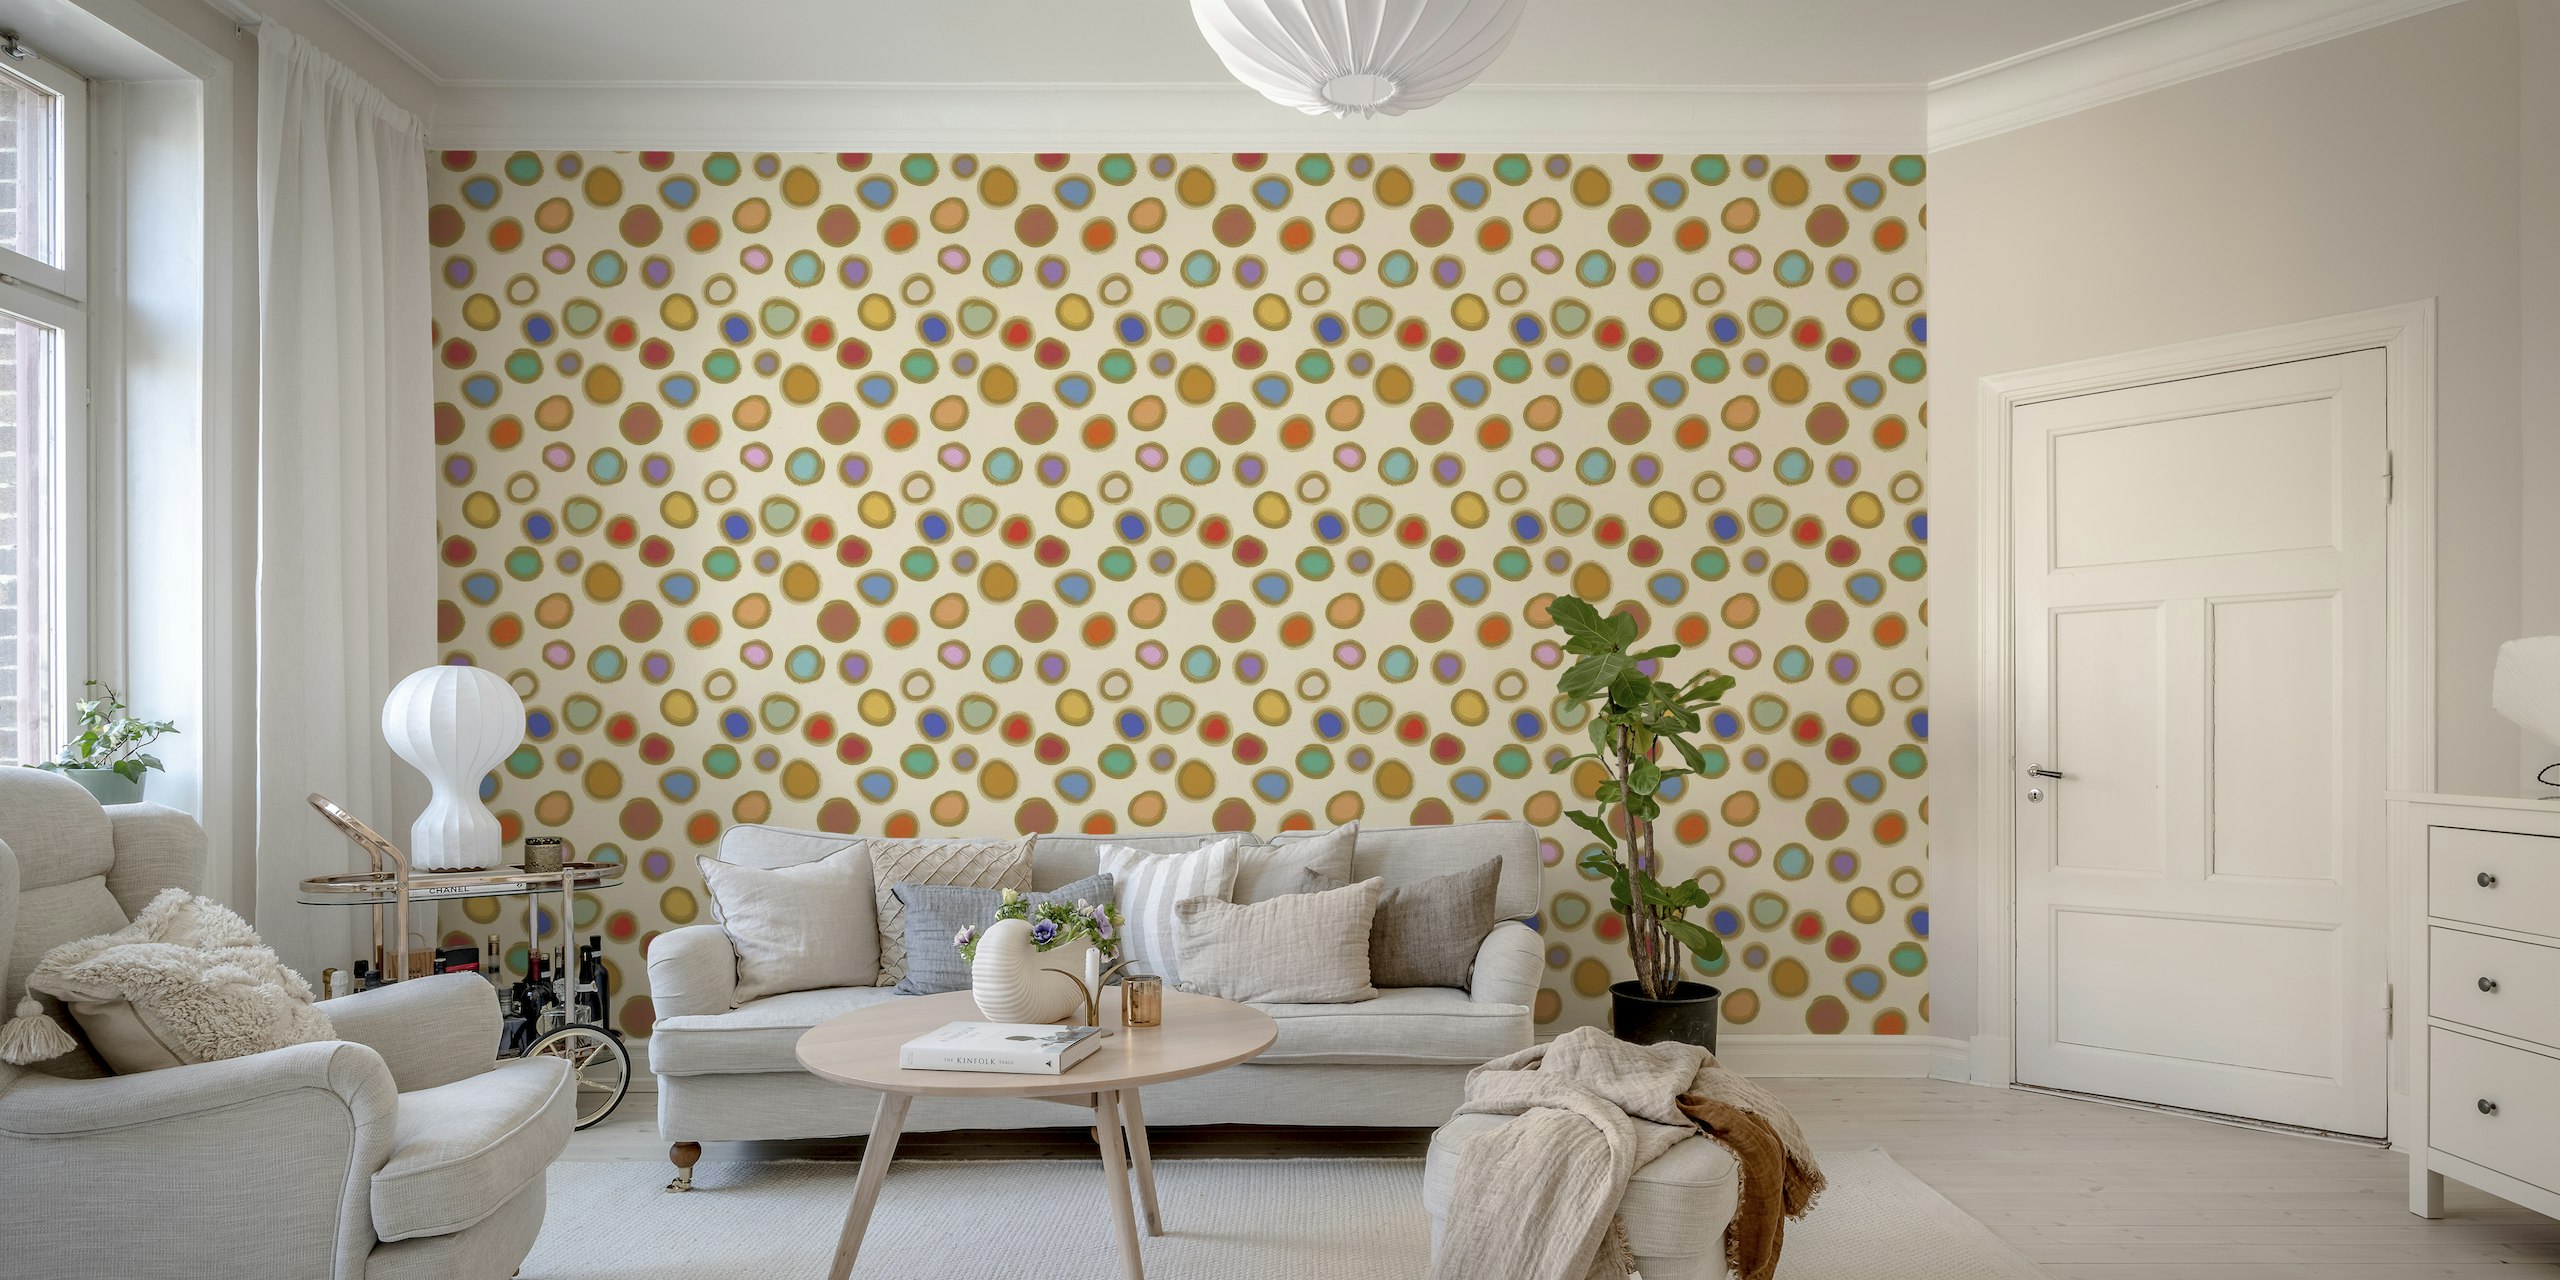 Painted Dots with Gold Outline on Cream Pattern wallpaper